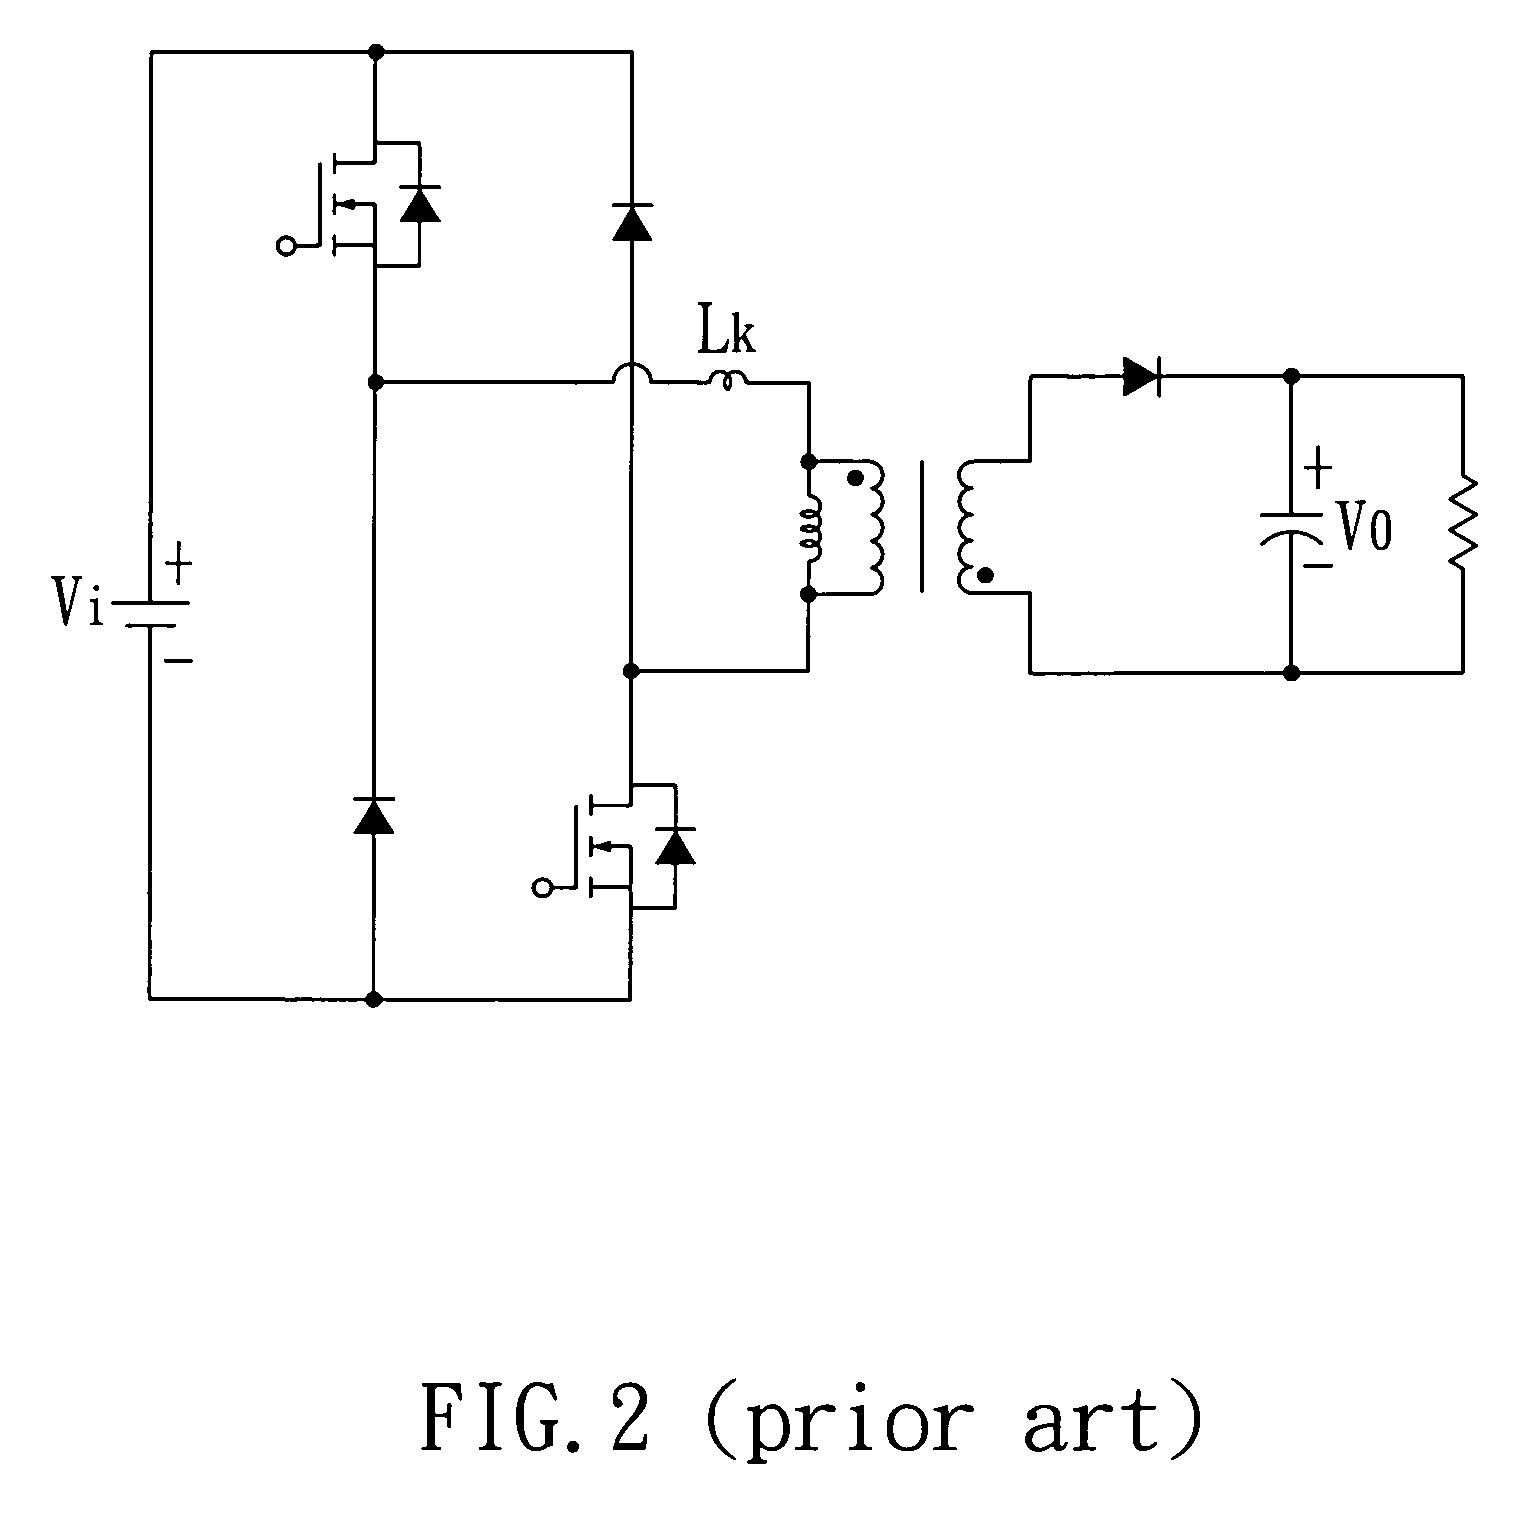 Interleaved flyback converter device with leakage energy recycling